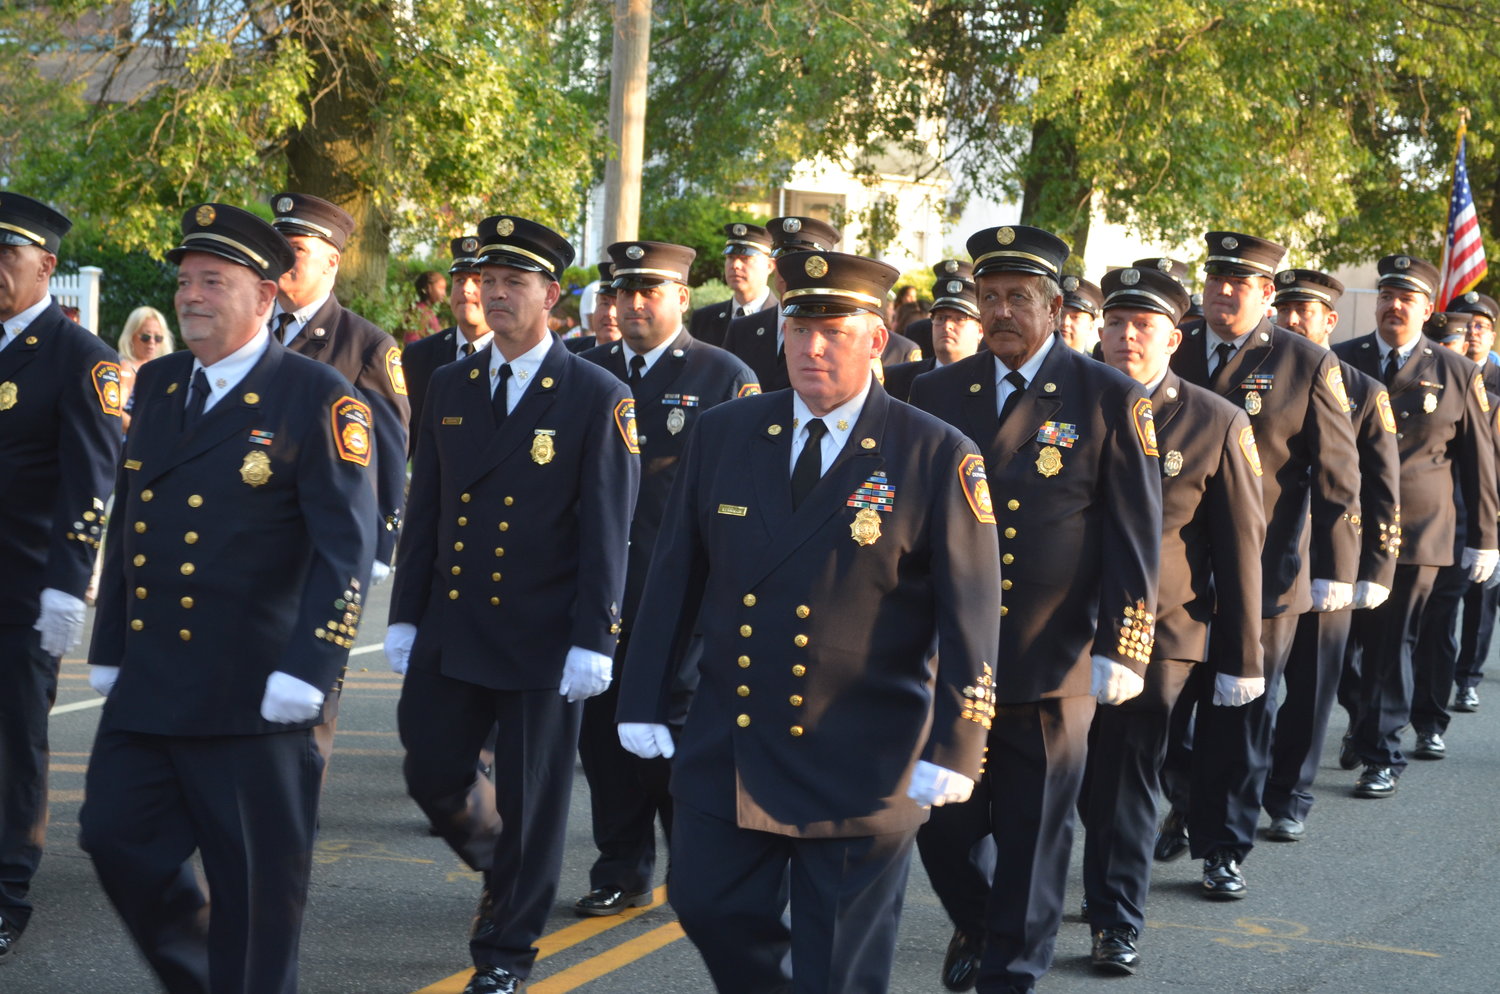 Members of the East Rockaway Fire Department march along Atlantic Avenue during the annual Fourth Battalion Fire Parade on Saturday.